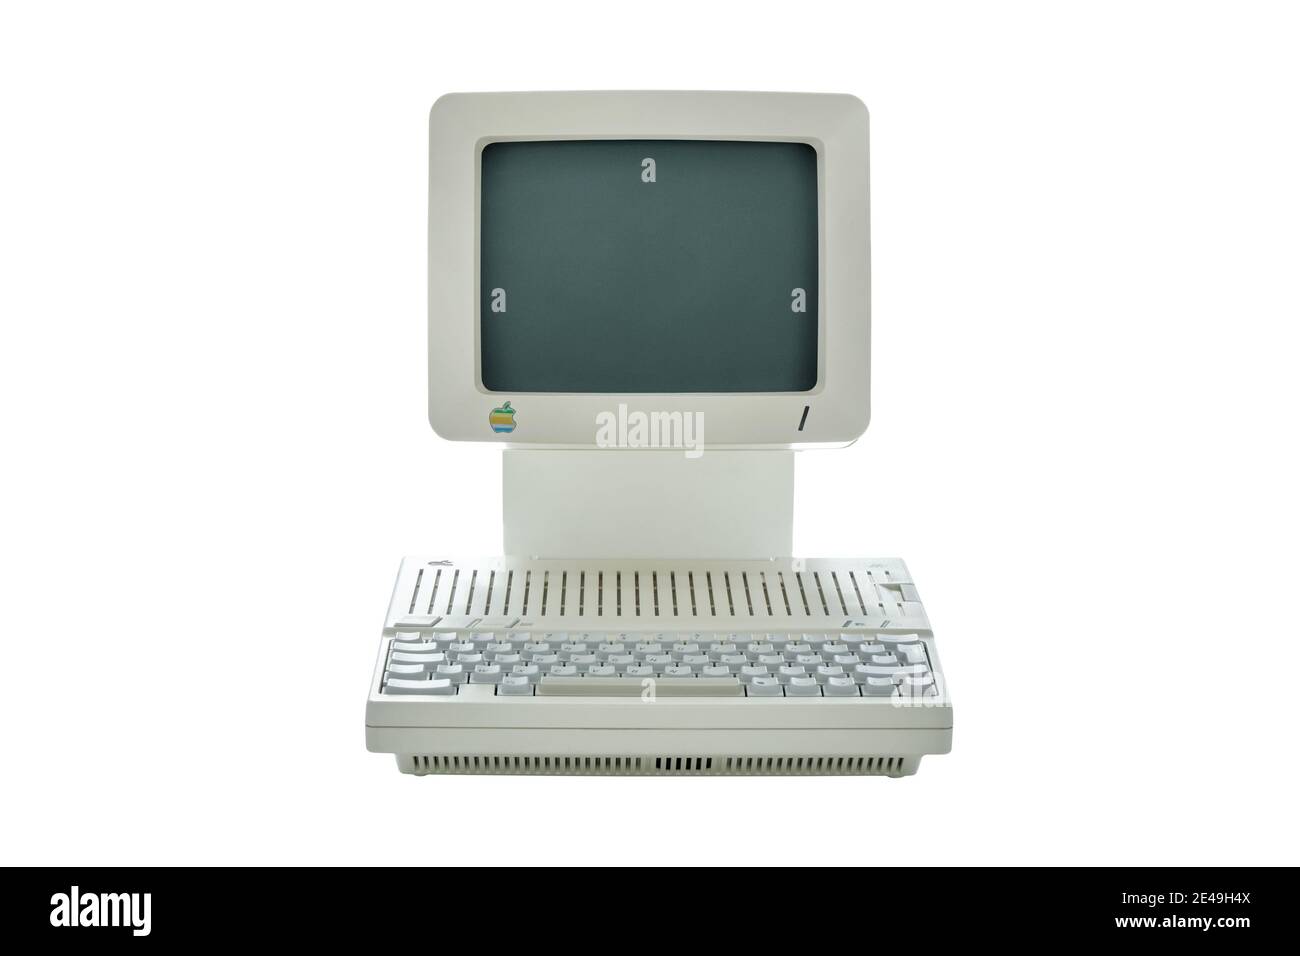 Vintage classic Apple desktop computer from the eighties with integrated monitor and keyboard isolated on white background Stock Photo